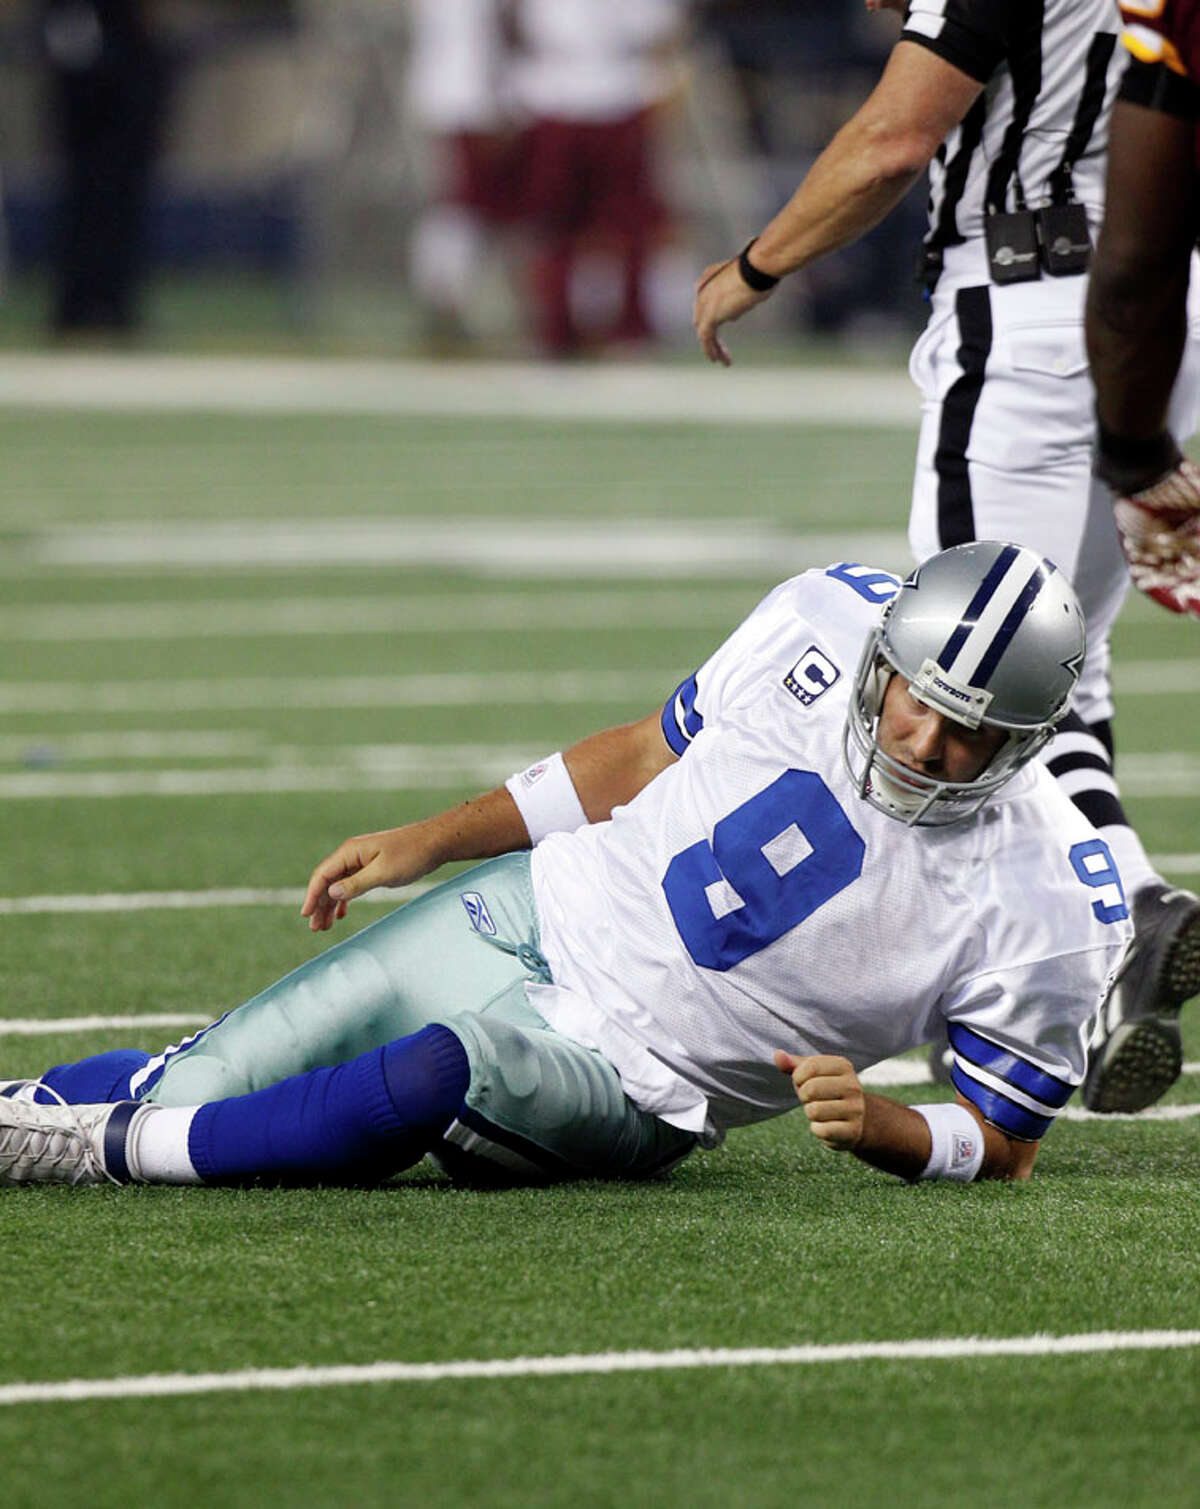 Dallas Cowboys quarterback Tony Romo lays on the turf after being knocked down by the Washington Redskins during the first half of an NFL football game Monday, Sept. 26, 2011, in Arlington.